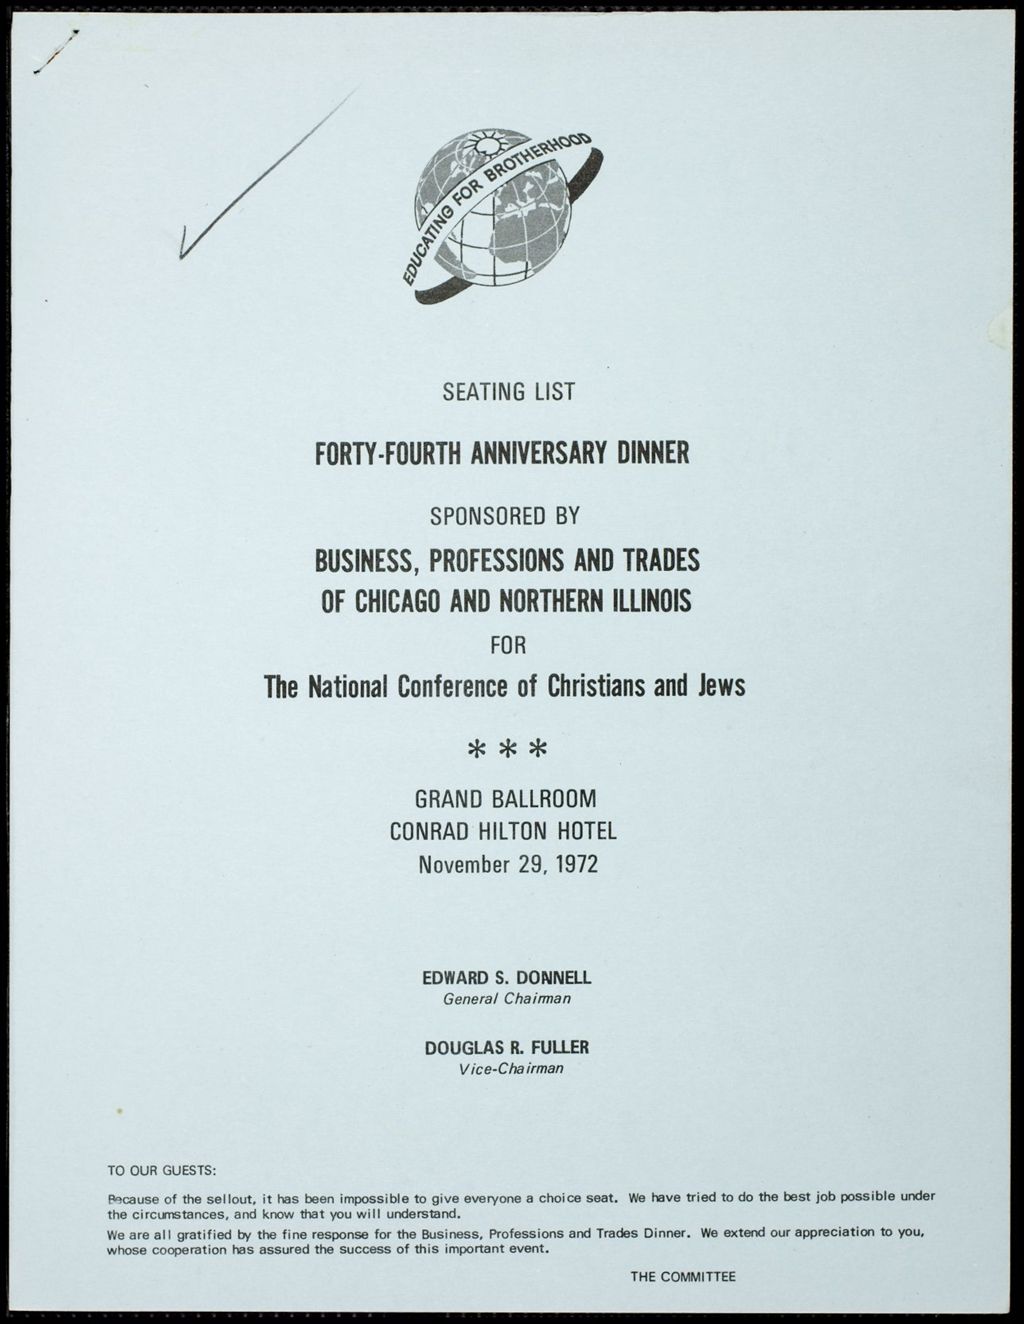 Miniature of National Conference of Christians and Jews, 1972 (Folder I-3007)